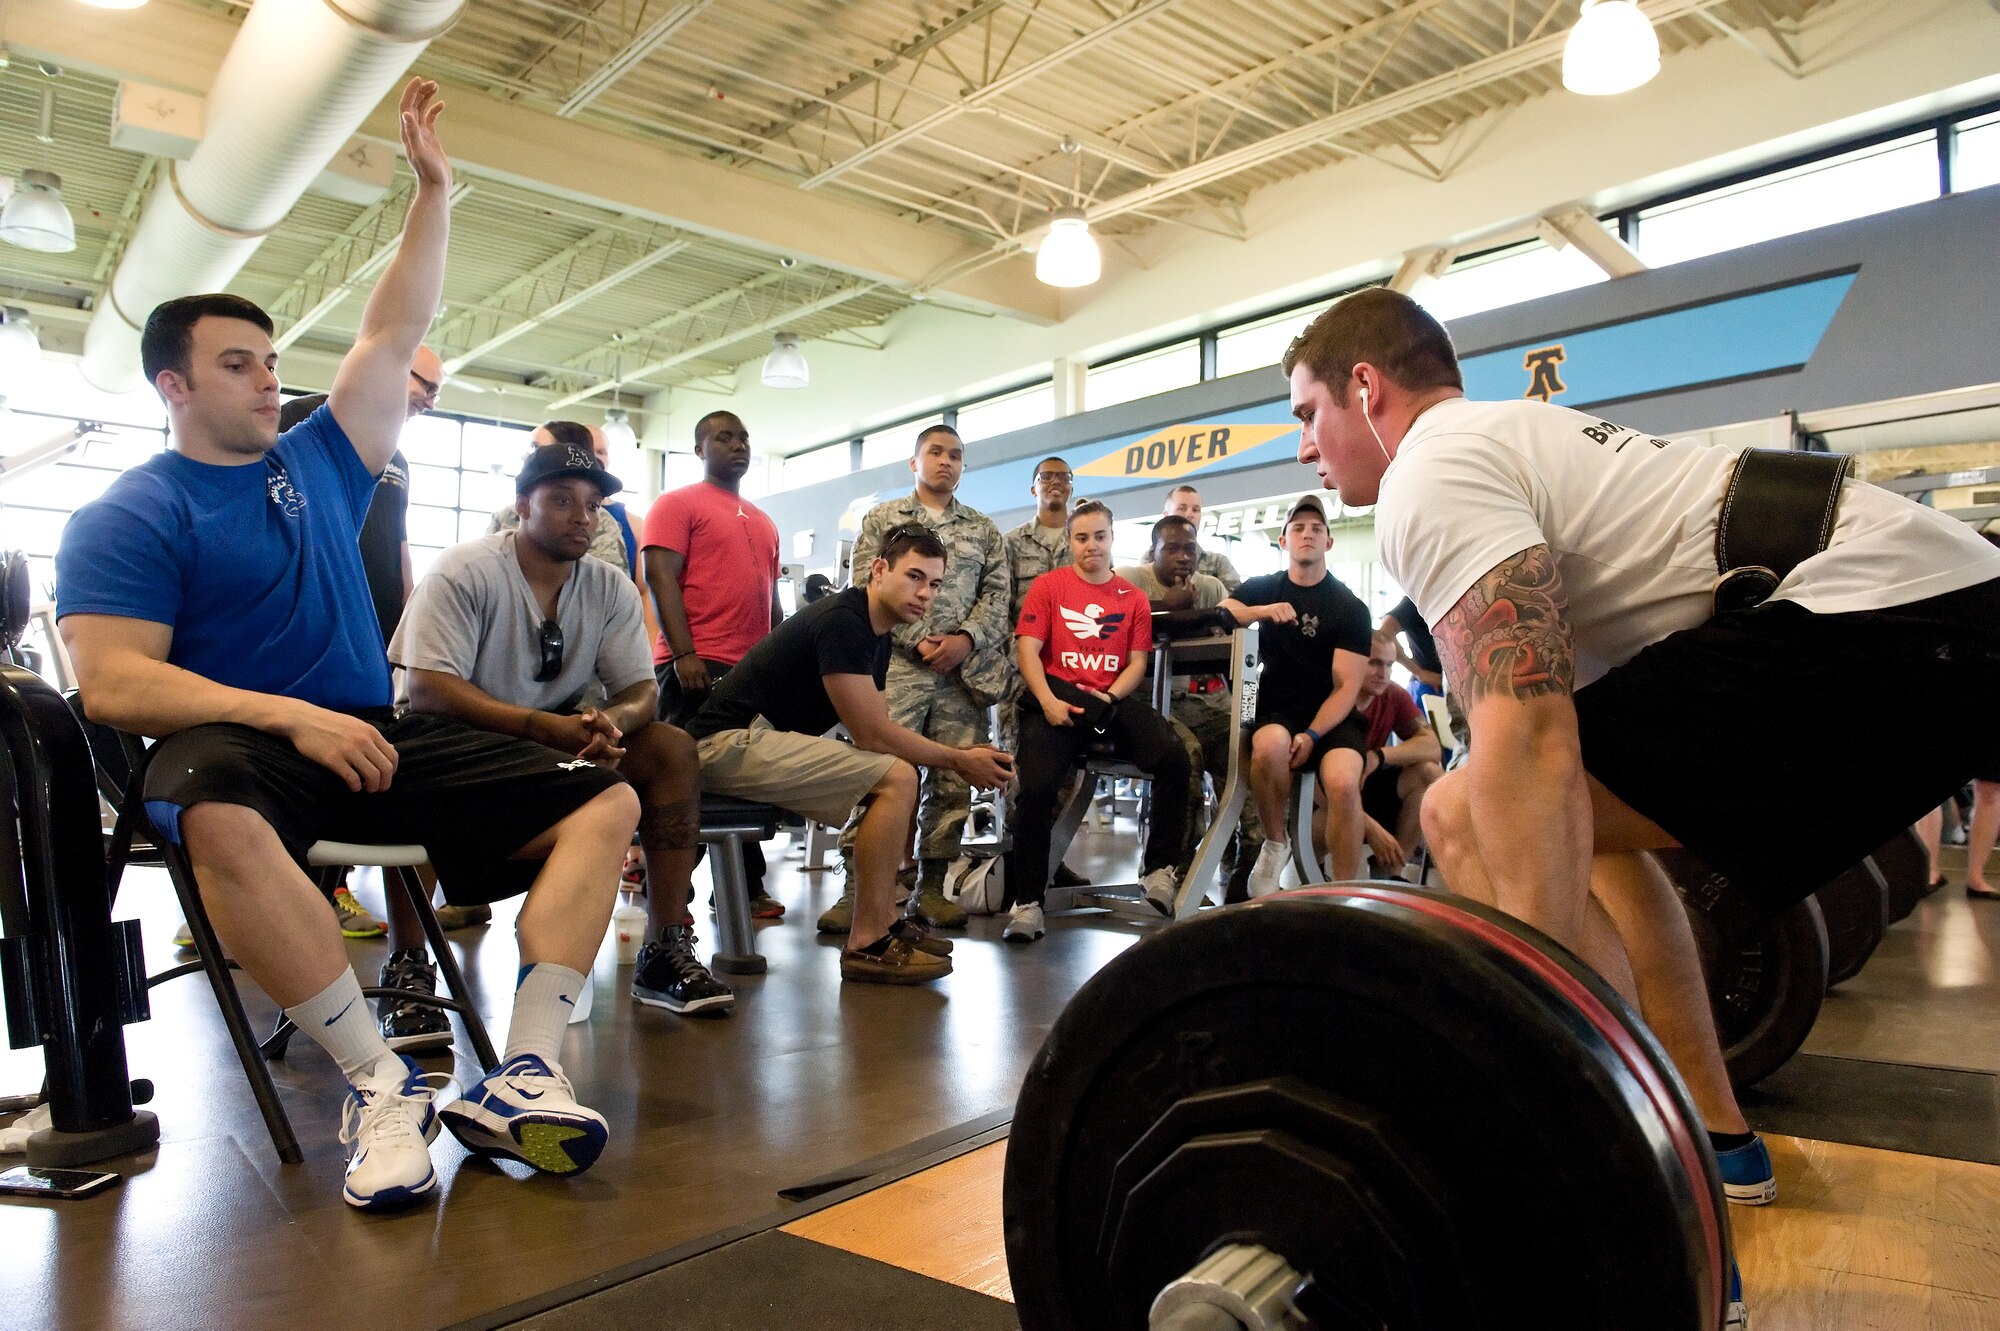 Deadlifting judge Scott Day, left, waits for Richard Dougherty, right, to lift 495 pounds on his second of three deadlift attempts during the powerlifting competition May 8, 2015, at the Fitness Center on Dover Air Force Base, Del. Dougherty placed third in the male 220-pound weight class with a combined total of 1,165 pounds for the squat, bench press and deadlift. (U.S. Air Force photo/Roland Balik)